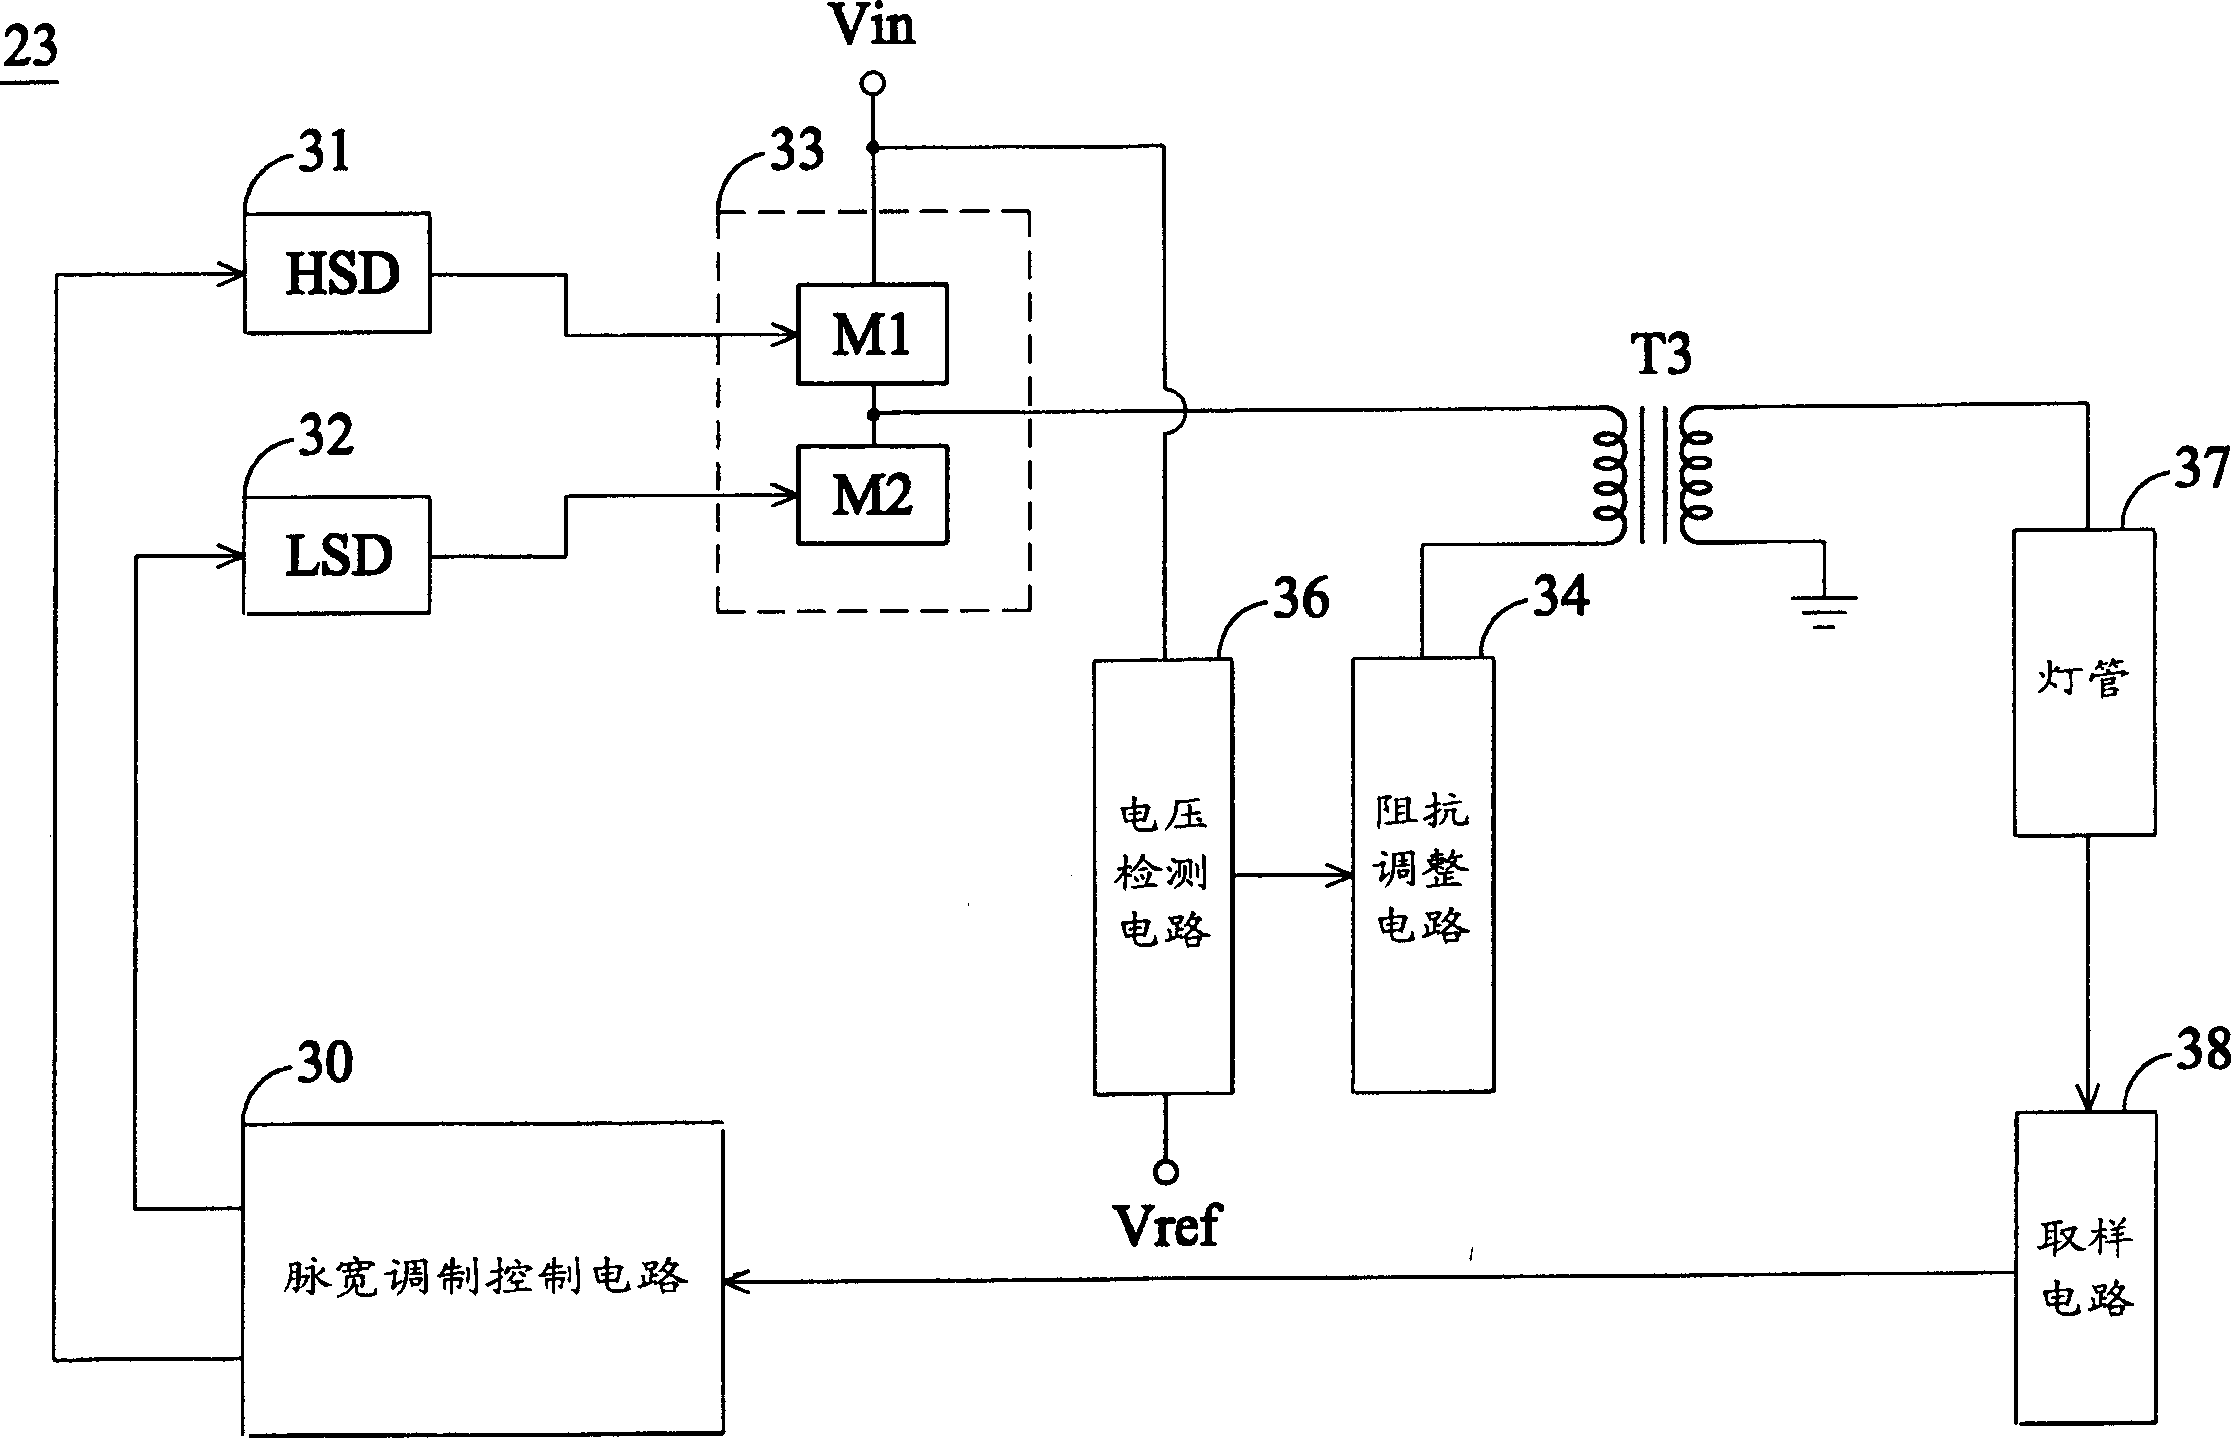 Power supply unit and used current converter